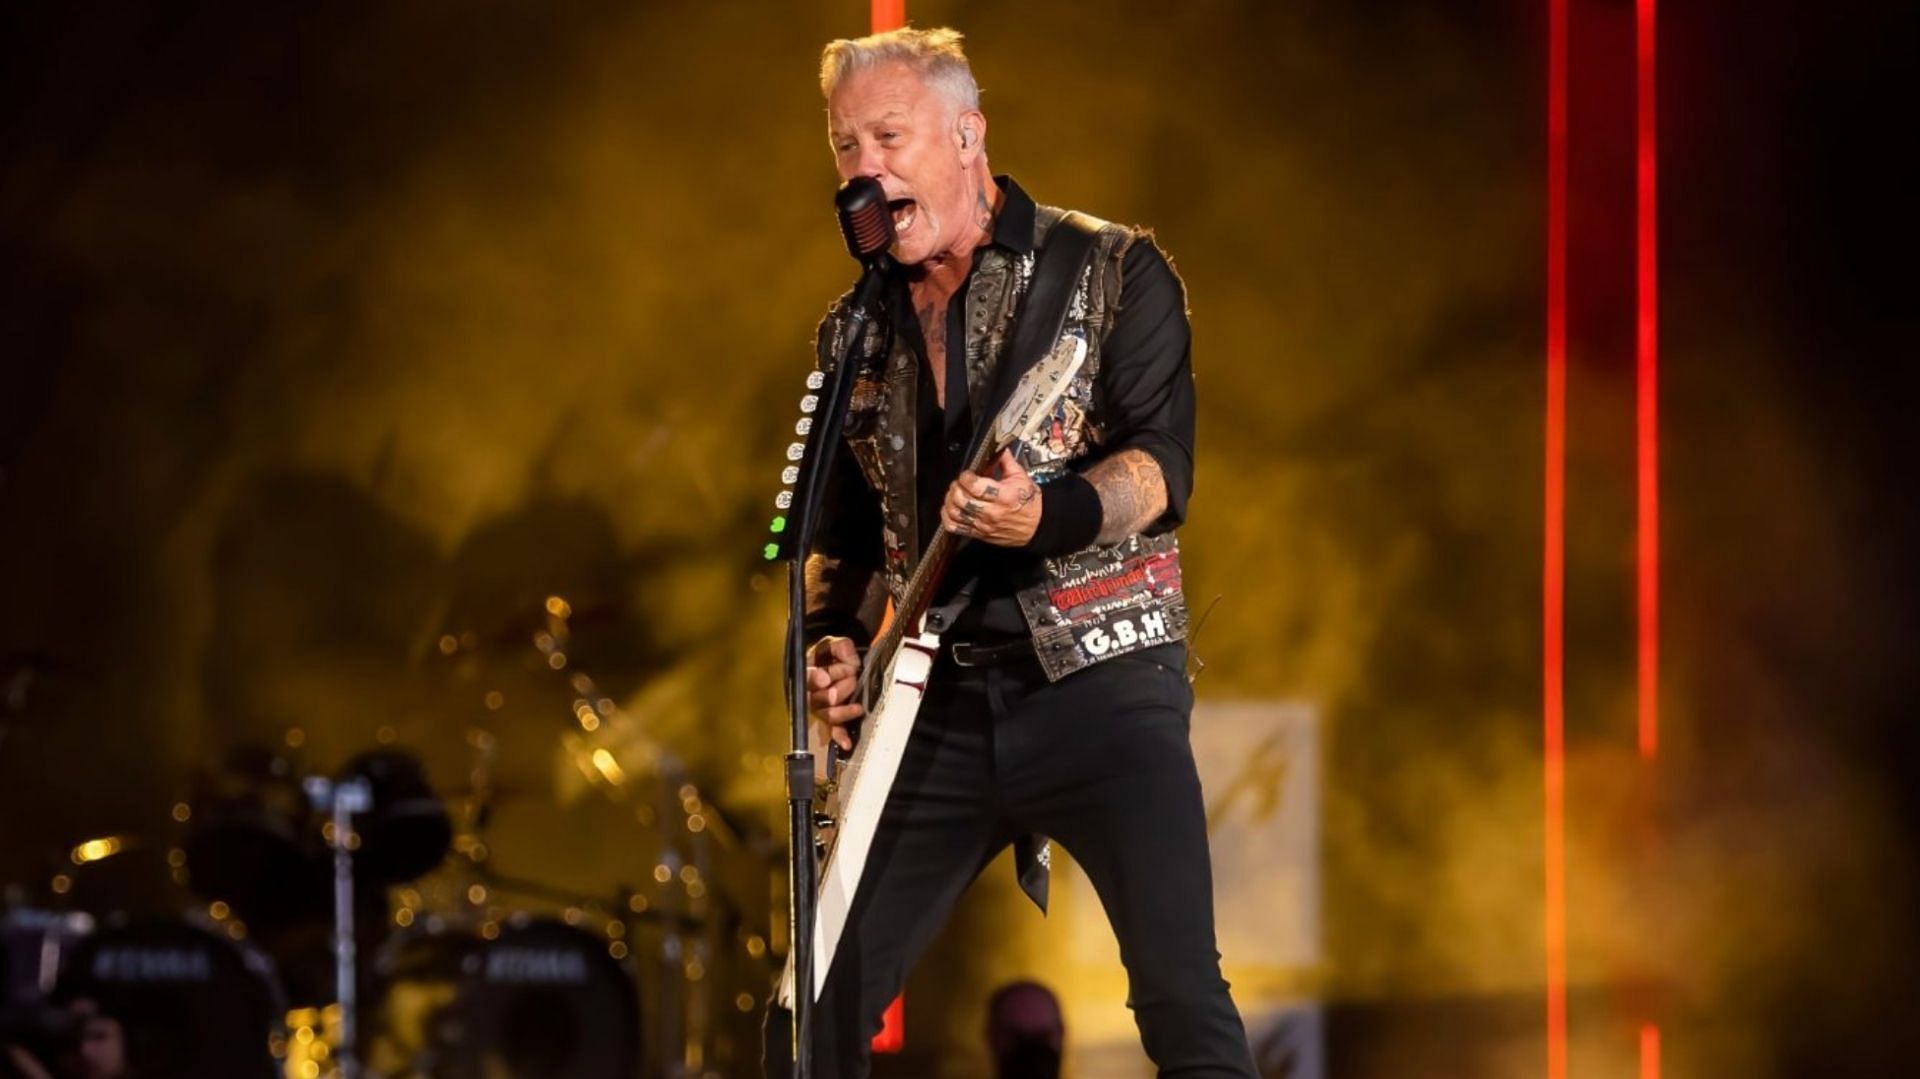 Metallica has announced a world tour in support of their new album. (Image via Getty)